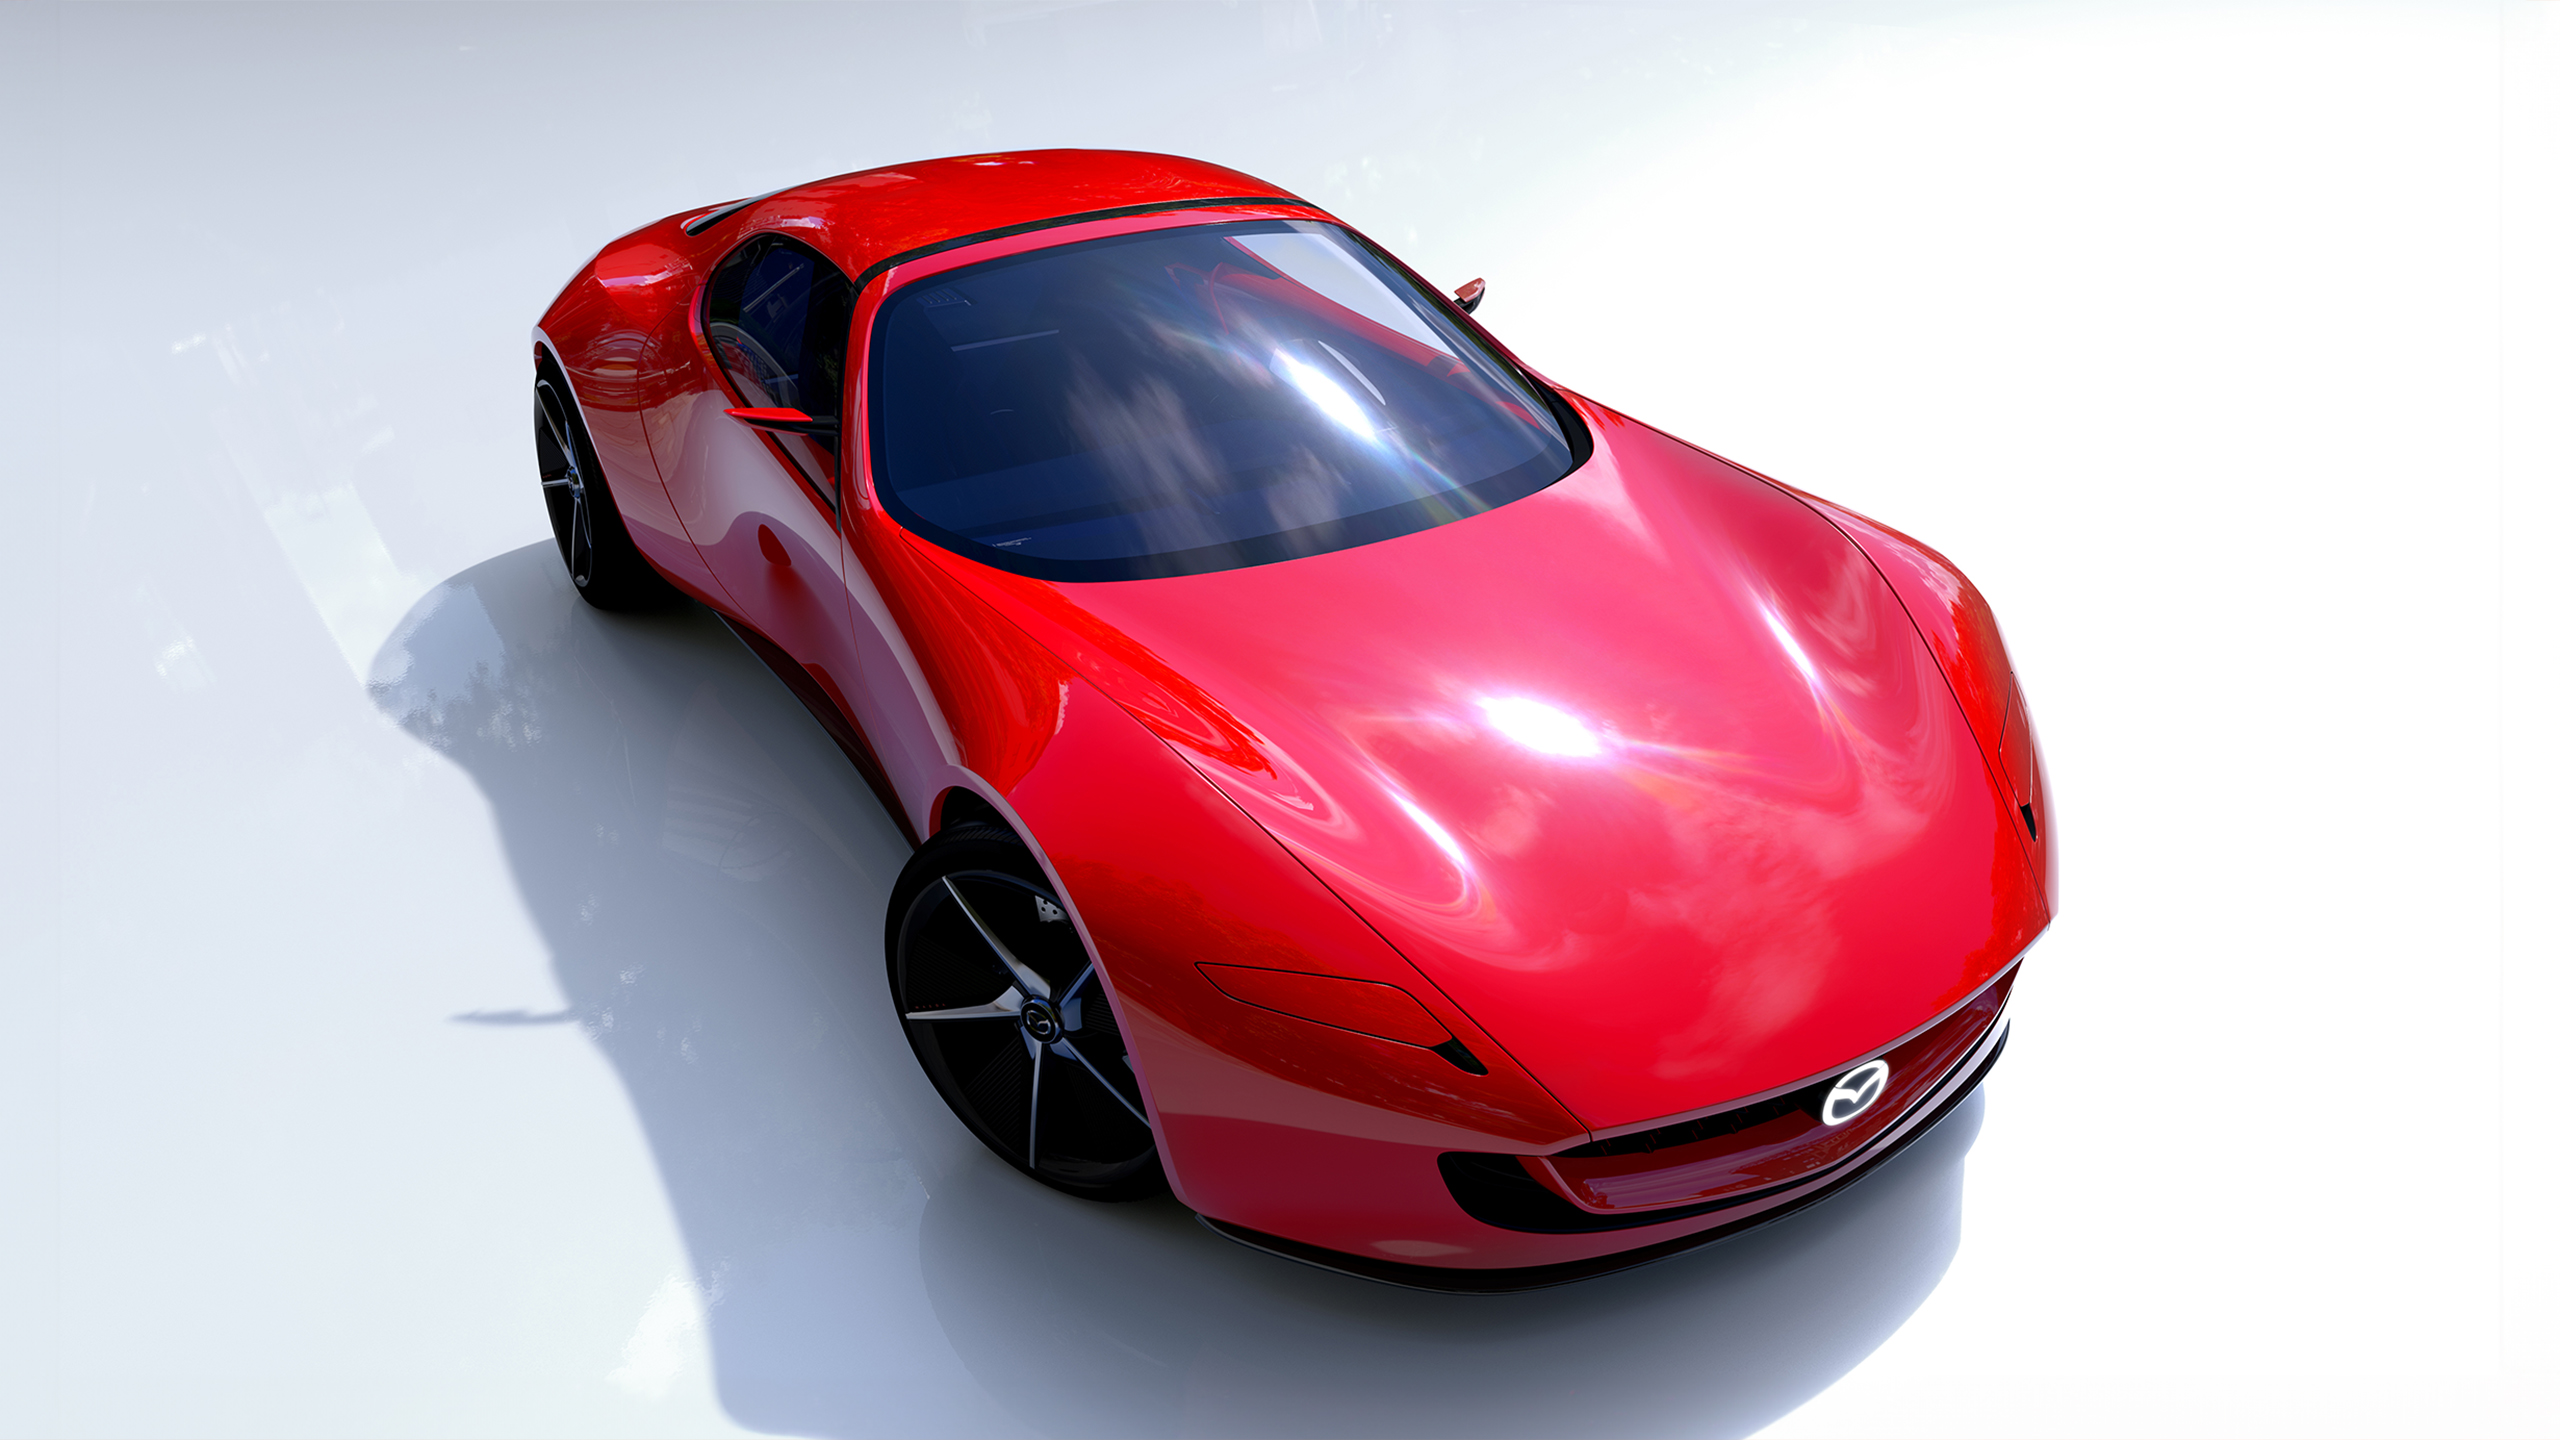 The Mazda Iconic SP Concept is an impressive hybrid sports car featuring a unique rotating design and headlights that pop up.